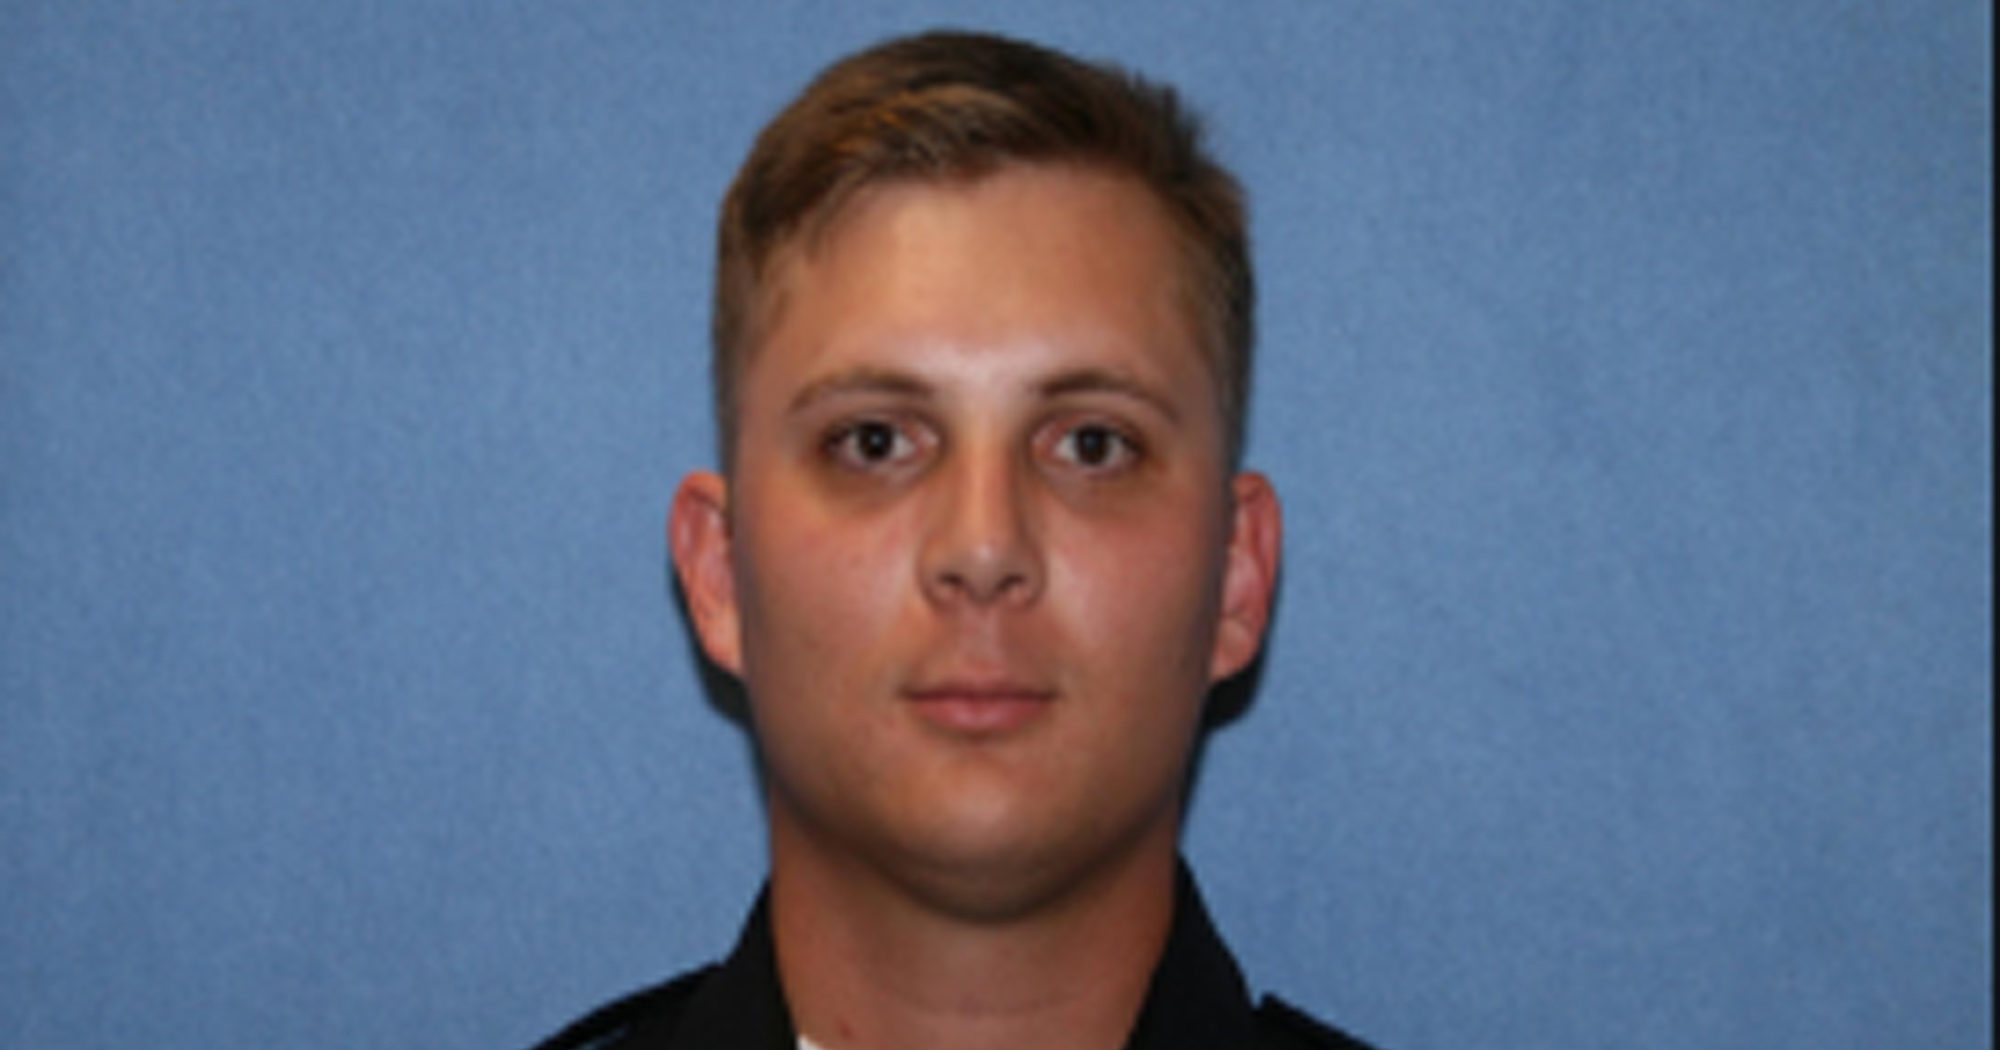 This undated photo shows Phoenix police officer Ginarro New. New died after being hit by a driver who ran a red light and also died, authorities said Tuesday.